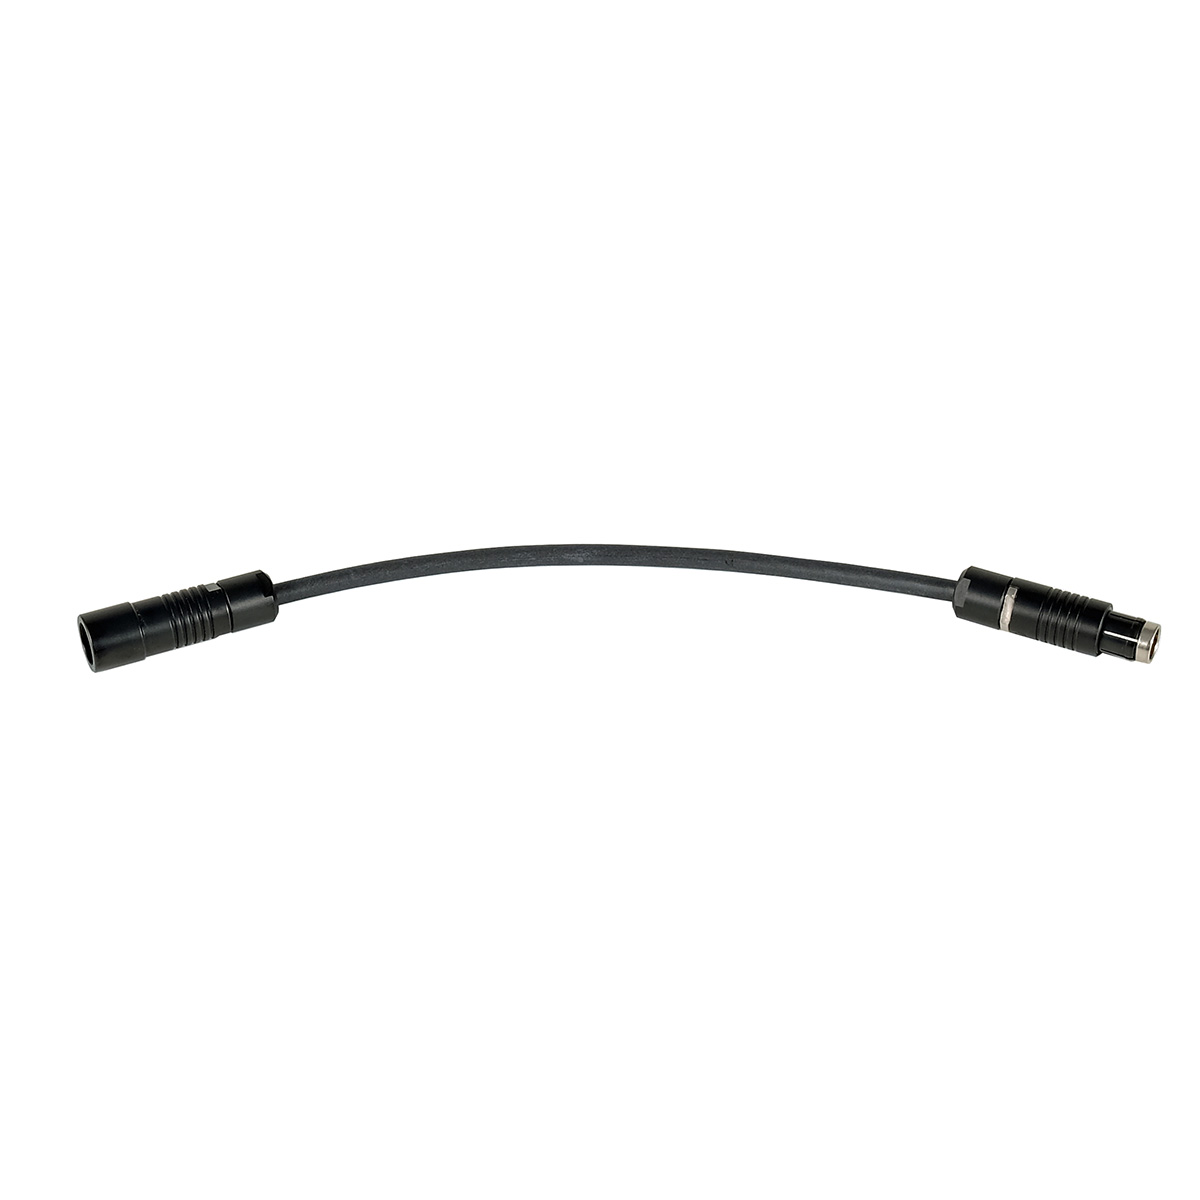 FoMa FS CAN – LBUS Adapter Cable 0,2 m / 0,66 ft